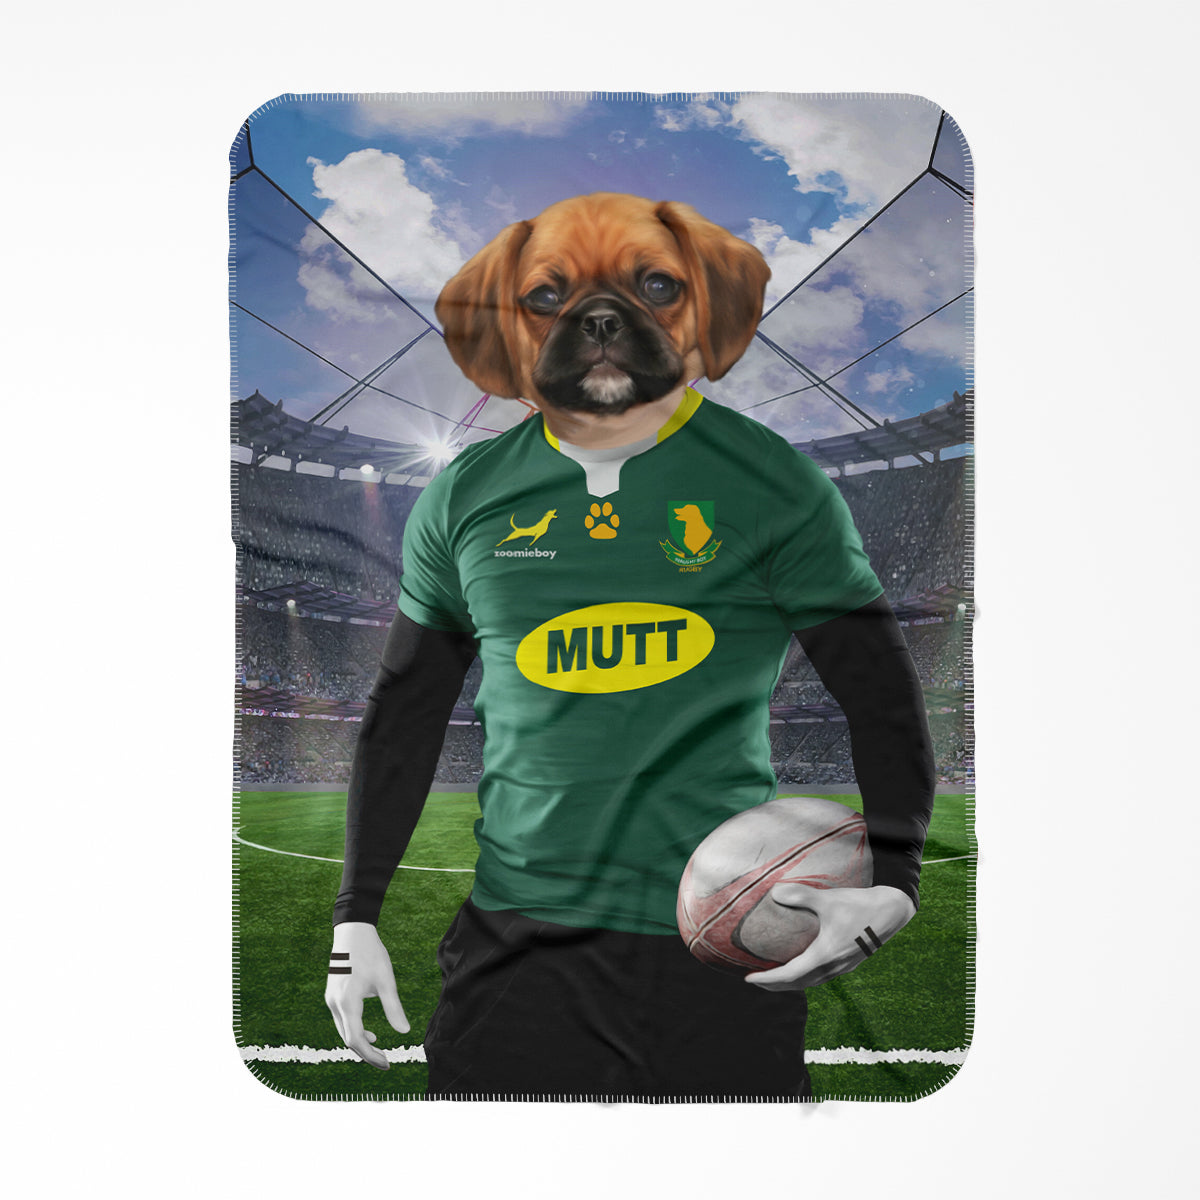 South Africa Rugby Team: Paw & Glory, paw and glory, pet blanket, dog photo blanket, personalised blanket with dog, pet art blanket, blanket with dog on it, personalized cat blankets, Pet Portraits blanket